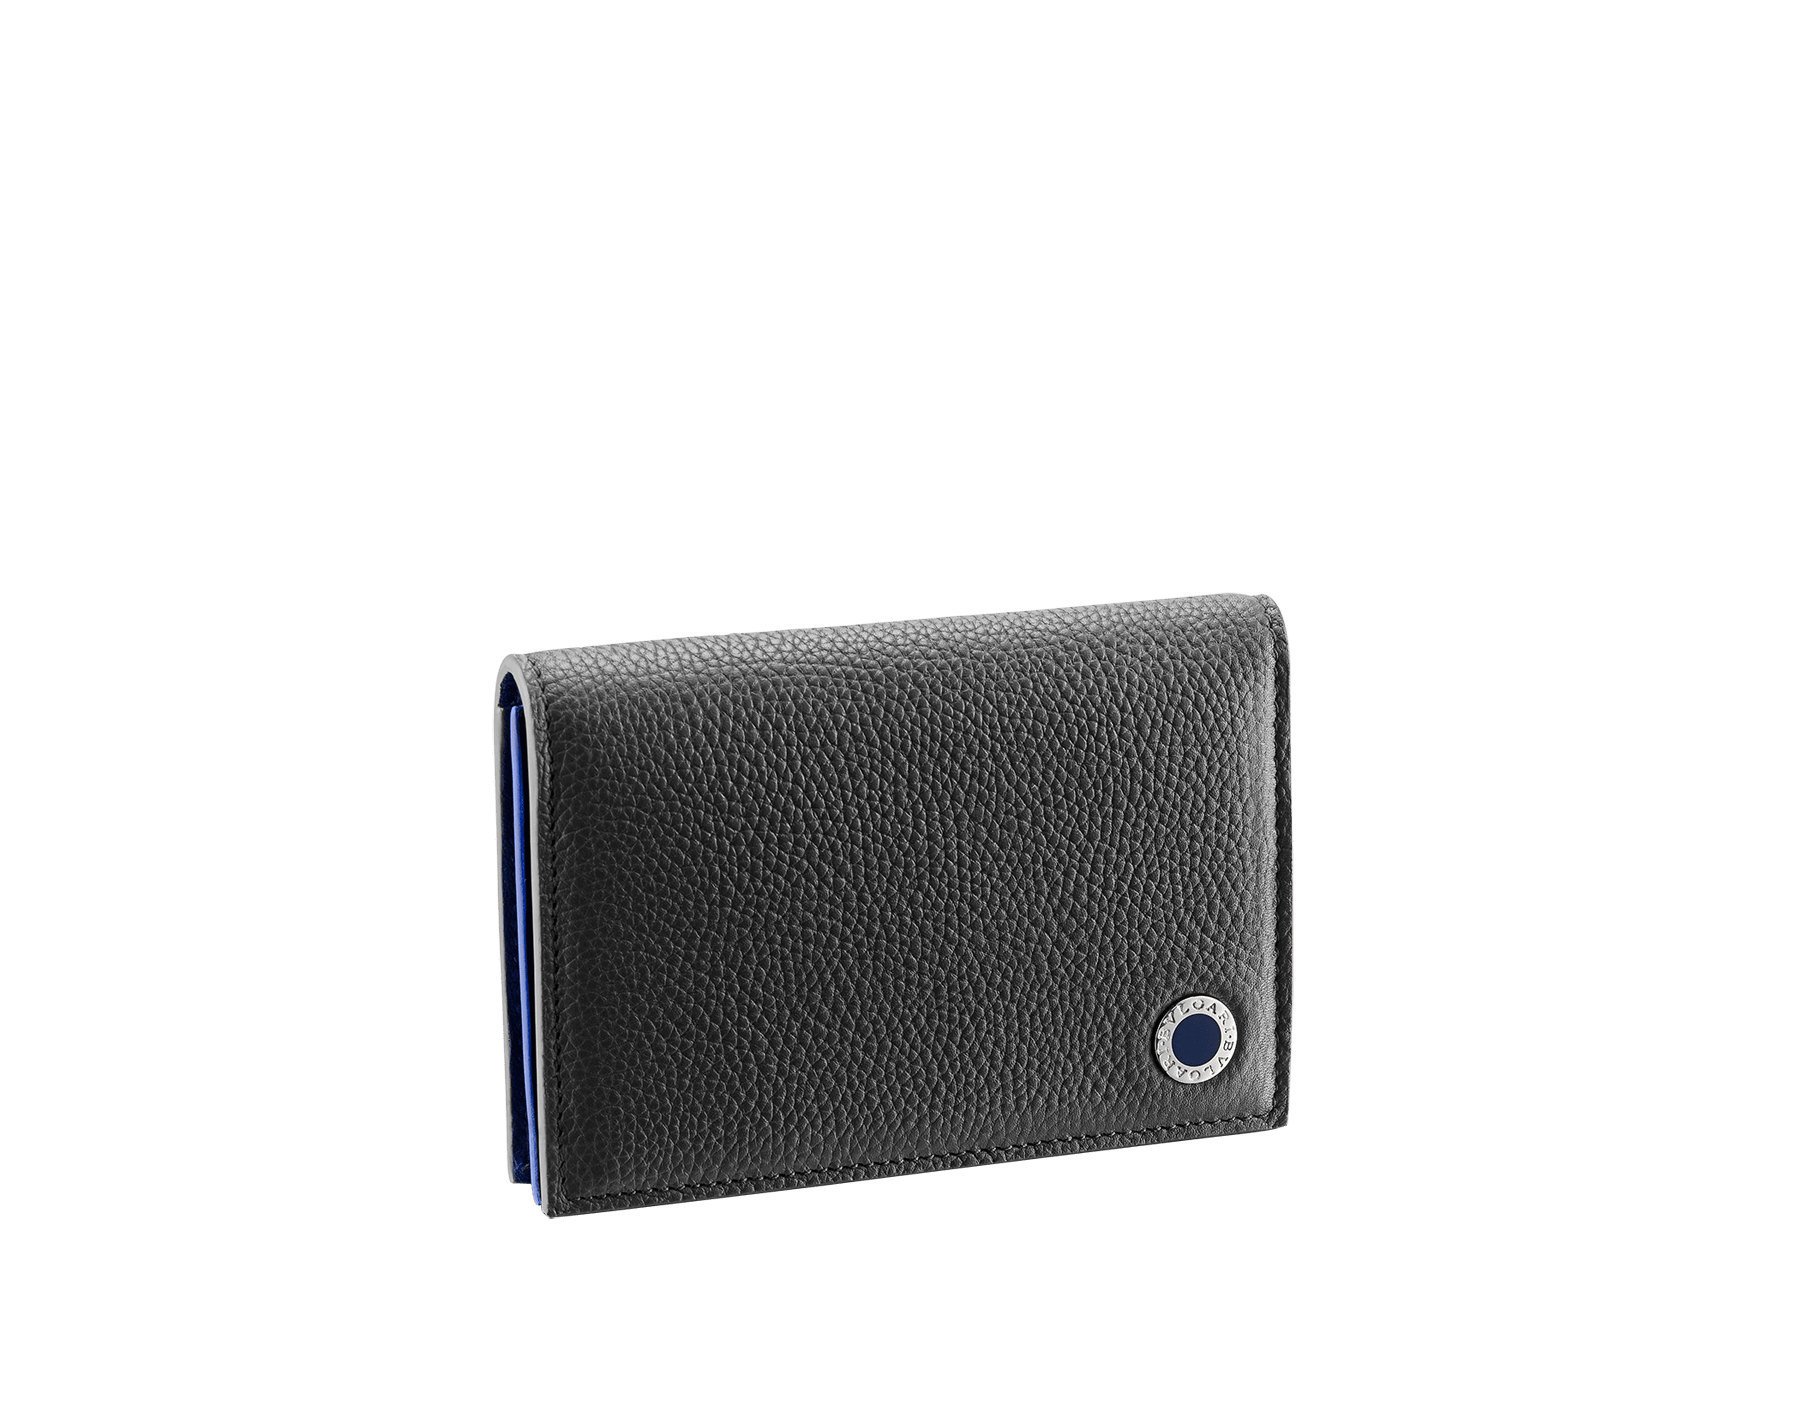 "BVLGARI BVLGARI" business card holder in denim sapphire soft full grain calf leather and capri turquoise calf leather, with brass palladium plated logo décor coloured in capri turquoise enamel. BBM-BC-HOLD-SIMPLE-sfgcl image 1